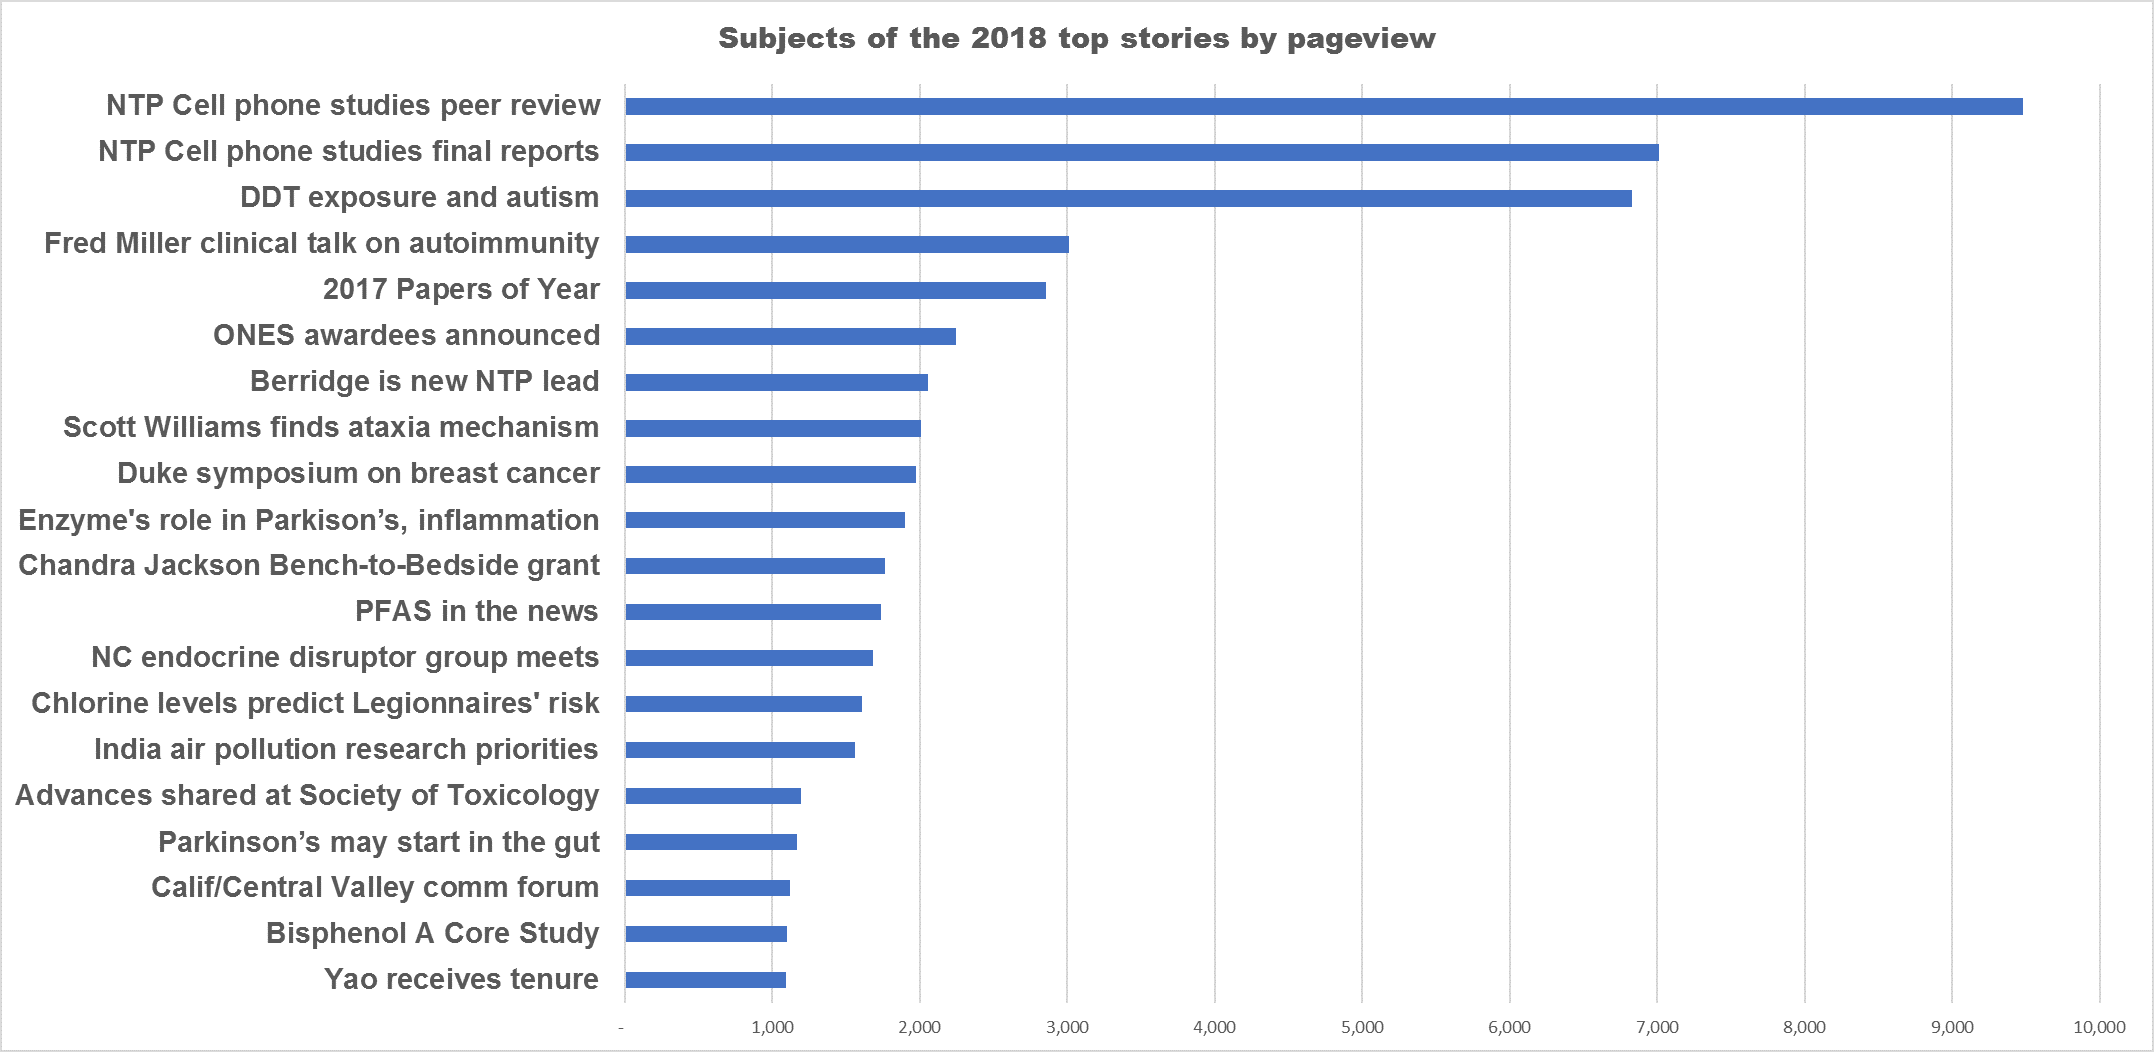 A bar graph showing the top 20 stories of 2018 and how many pageviews each story had.The top 3 subjects were "NTP cell phone studies peer review" with approximately 9500 pagesviews, "NTP Cell phone studies final reports" with just over 7000 pageviews, and "DDT exposure and autism" with around 6800 pageviews.